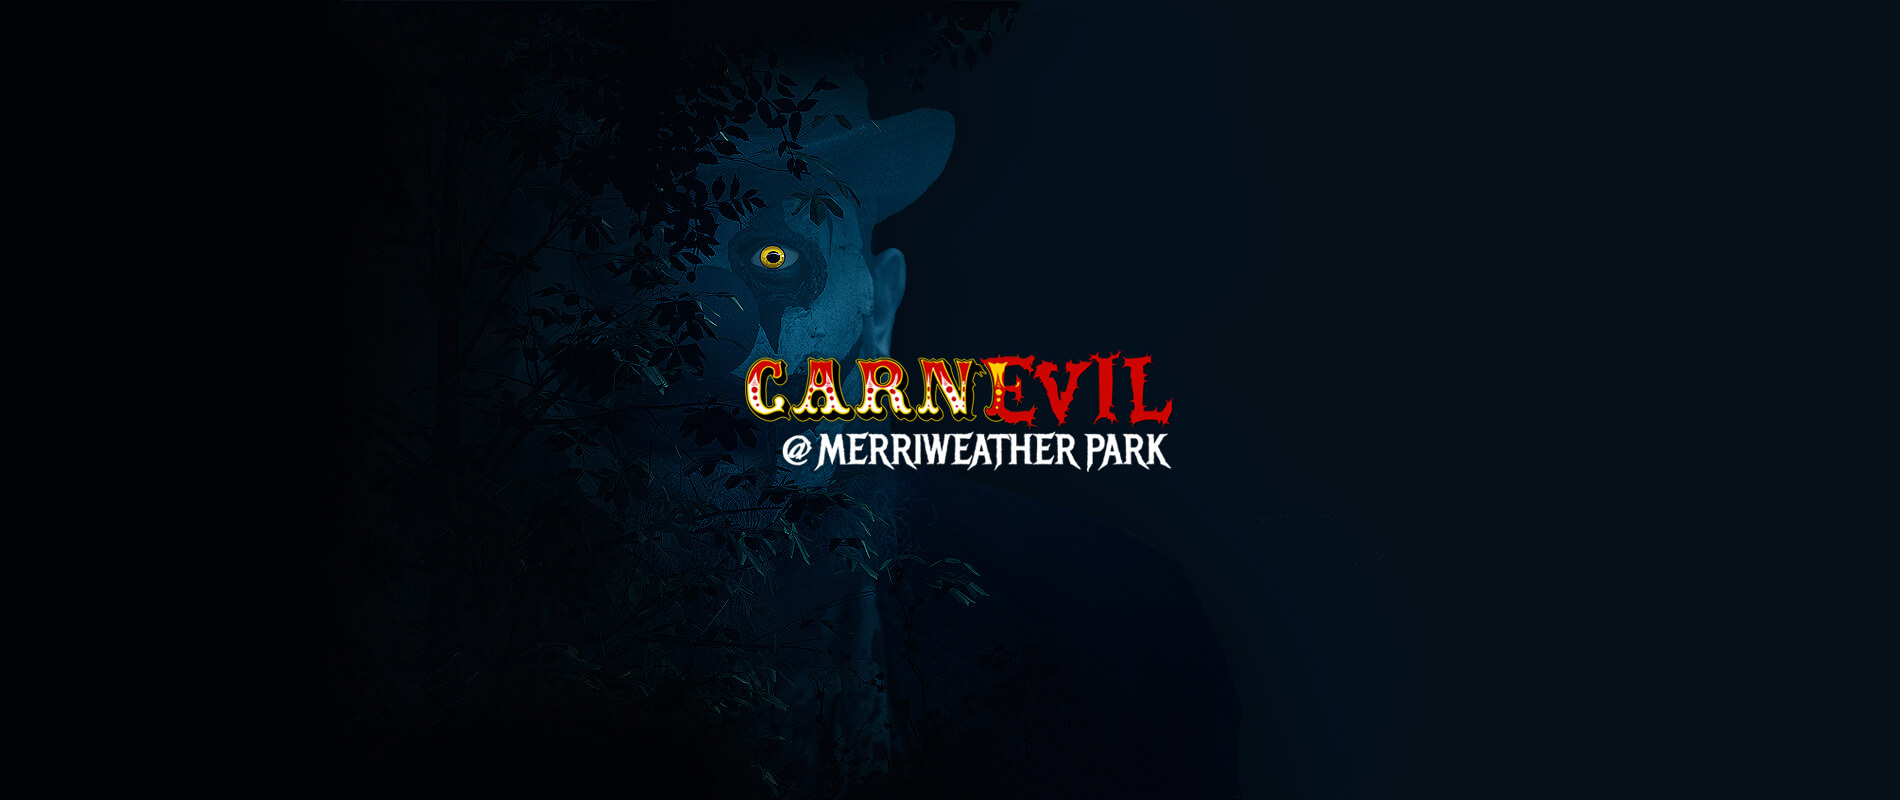 Carnevil to provide thrills and chills at merriweather